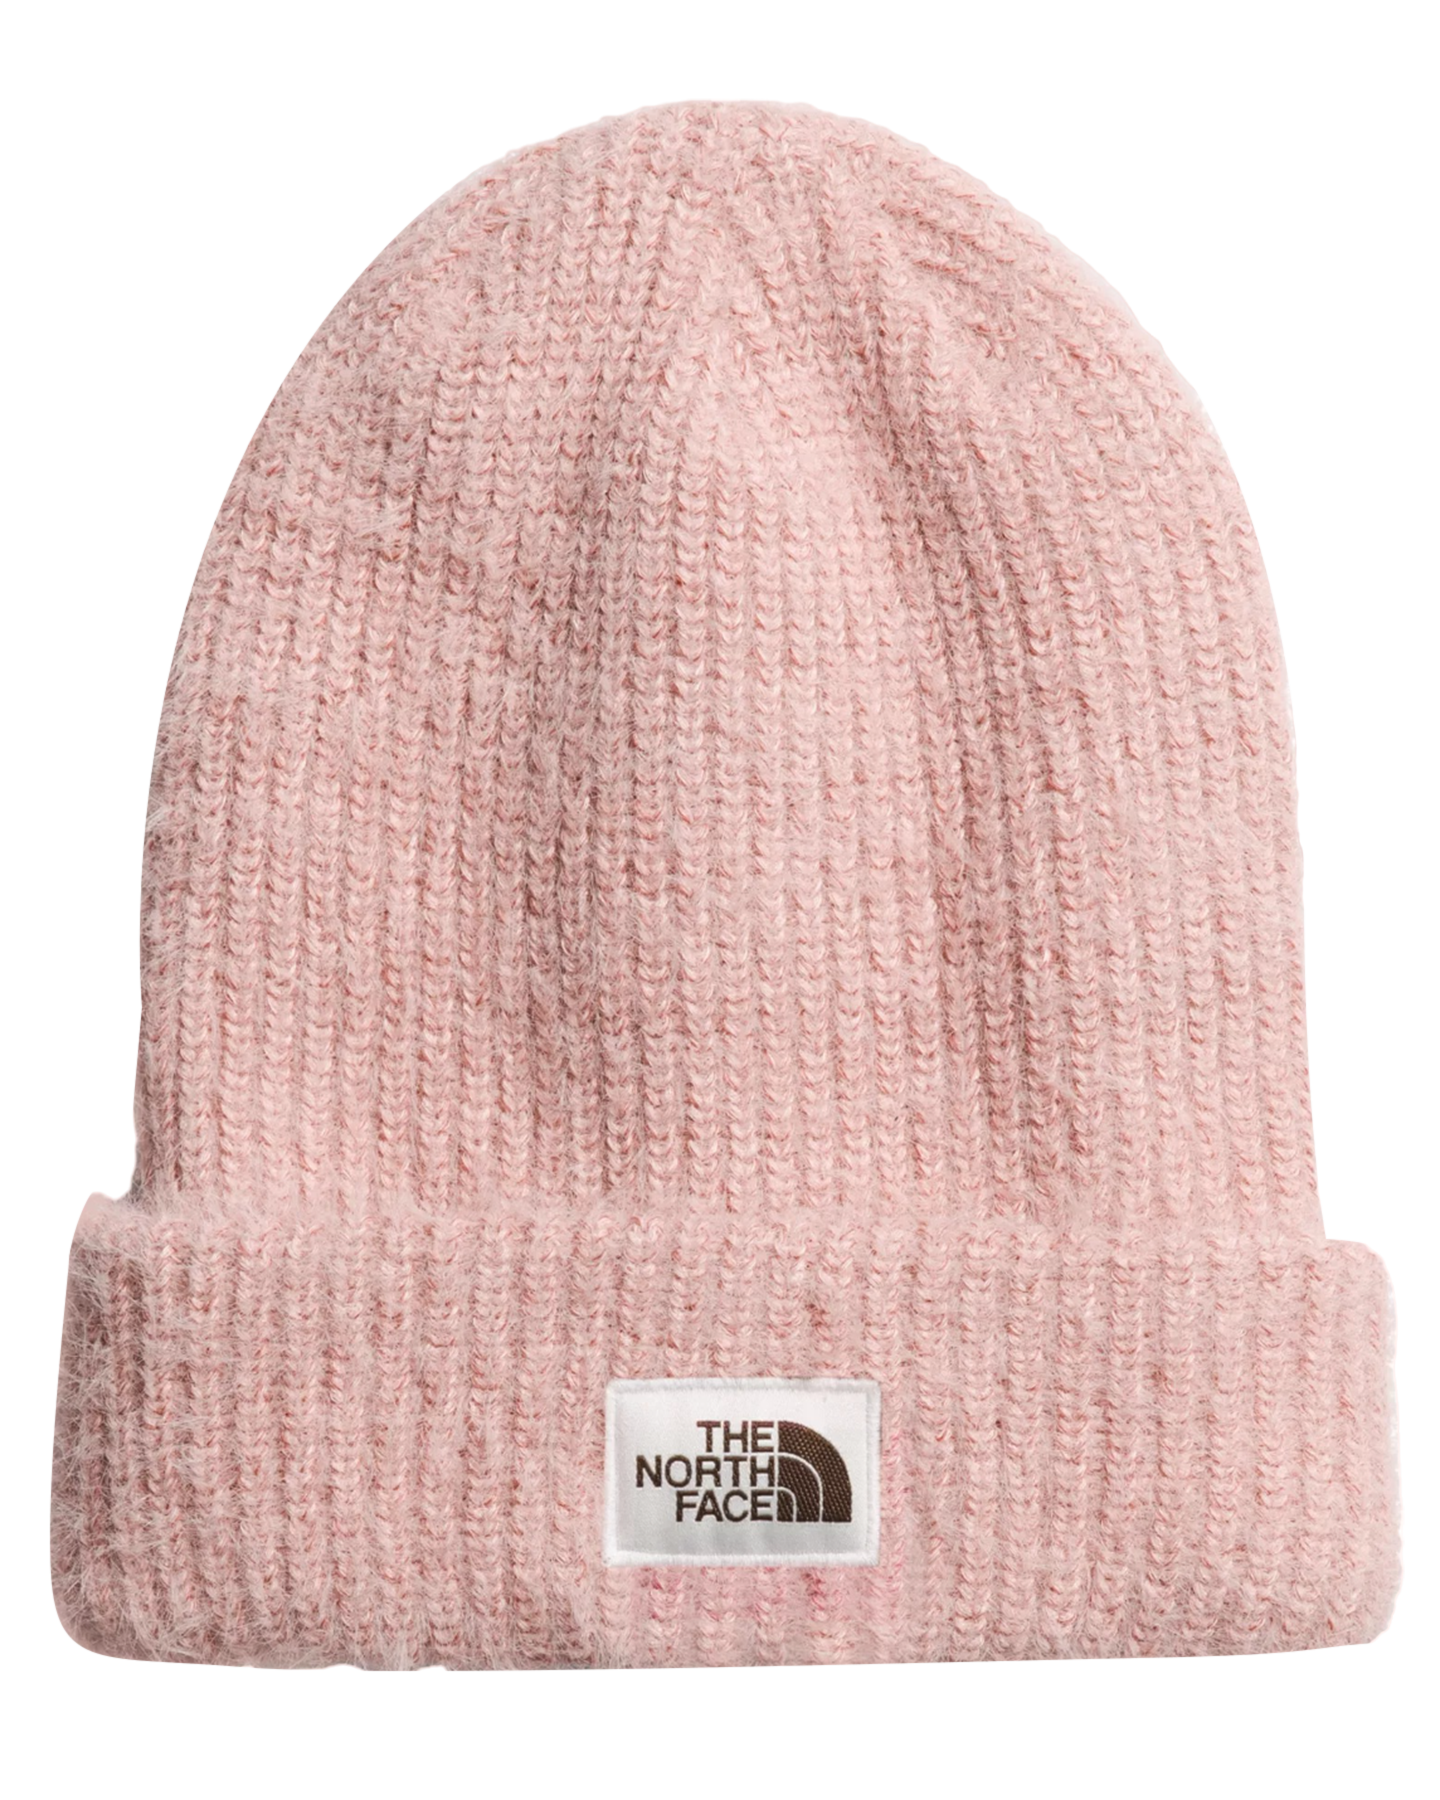 The North Face Salty Bae Lined Beanie - Pink Moss Beanies - SnowSkiersWarehouse